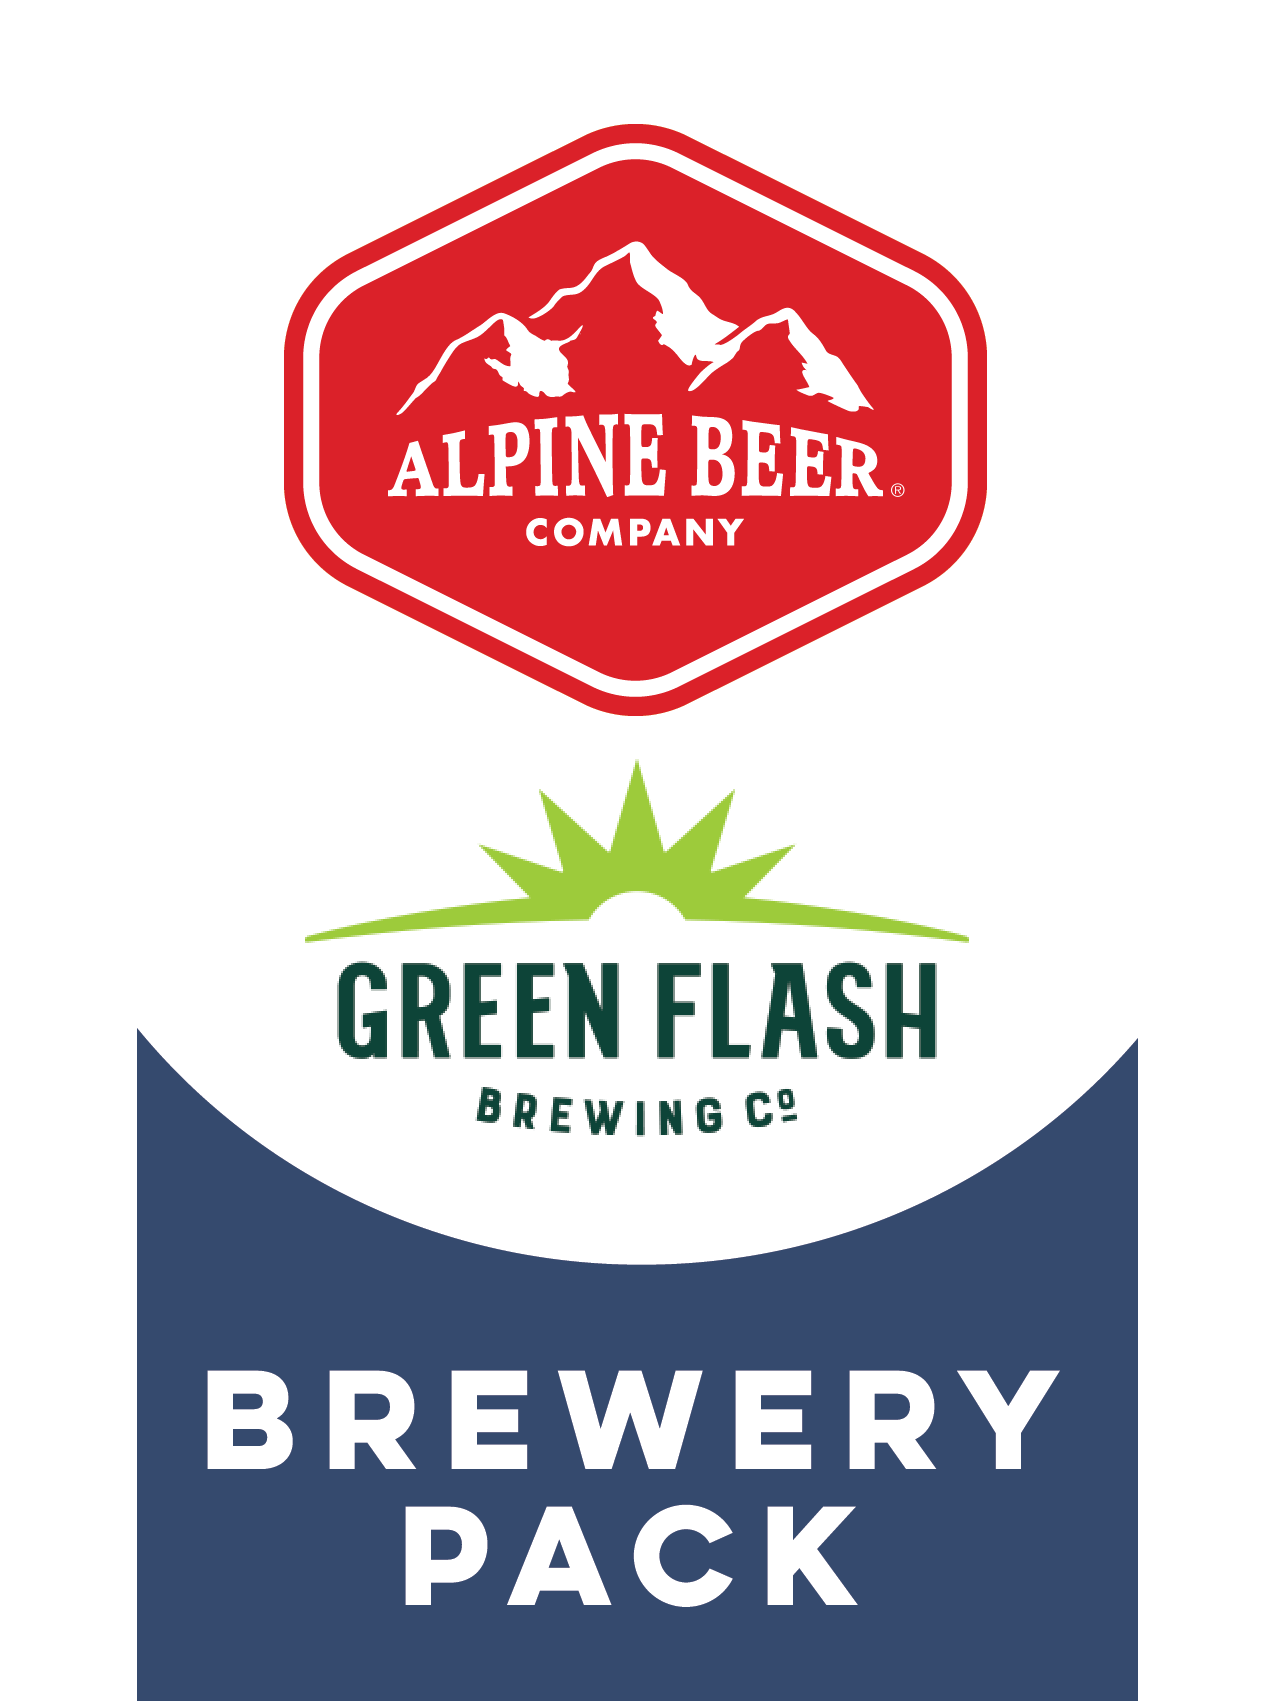 -Alpine- Alpine & Green Flash Brewery Pack-Packs & Cases- Only @ Beer Republic - The best online beer store for American & Canadian craft beer - Buy beer online from the USA and Canada - Bier online kopen - Amerikaans bier kopen - Craft beer store - Craft beer kopen - Amerikanisch bier kaufen - Bier online kaufen - Acheter biere online - IPA - Stout - Porter - New England IPA - Hazy IPA - Imperial Stout - Barrel Aged - Barrel Aged Imperial Stout - Brown - Dark beer - Blond - Blonde - Pilsner - Lager - Wheat